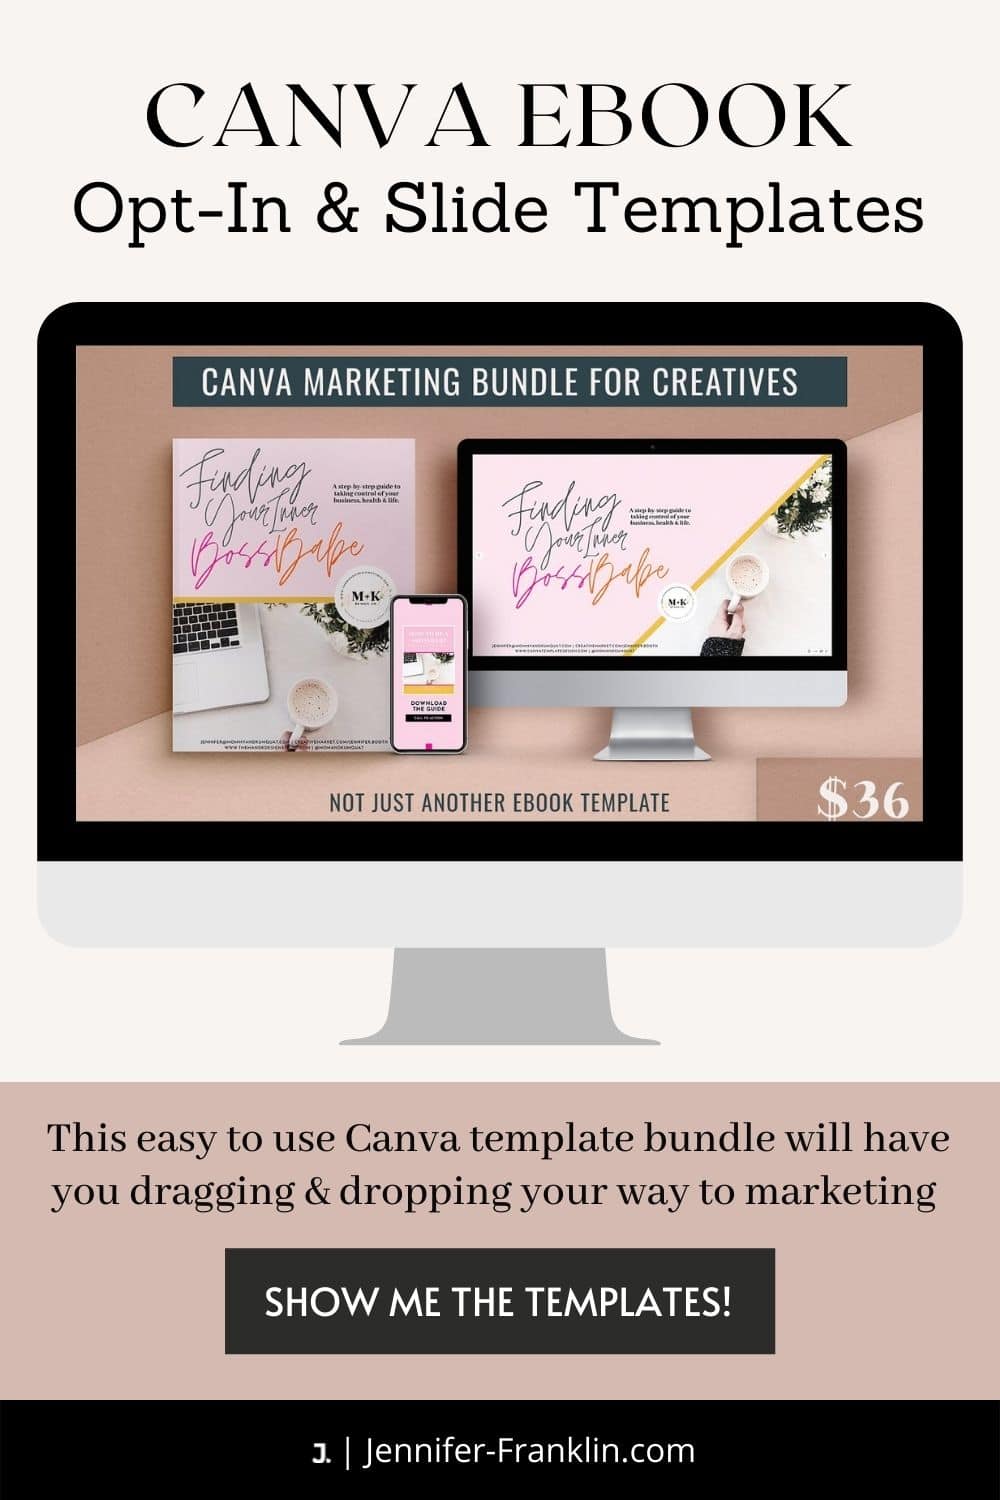 Canva eBook Opt-In & Slide Templates